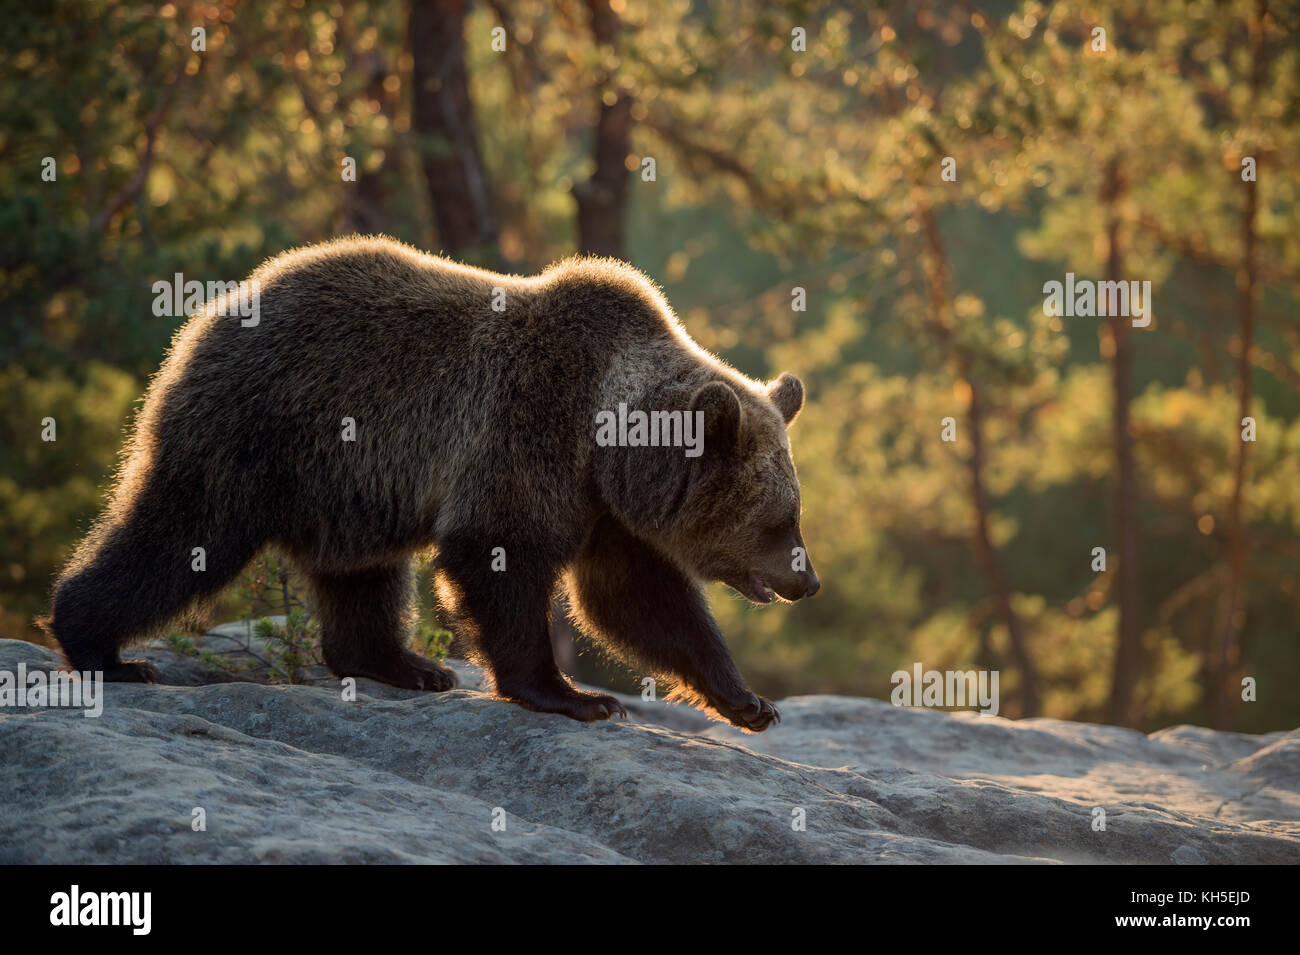 European Brown Bear / Braunbaer ( Ursus arctos ), young, walking over rocks on a clearing in a boreal forest, first warm morning light, Europe. Stock Photo